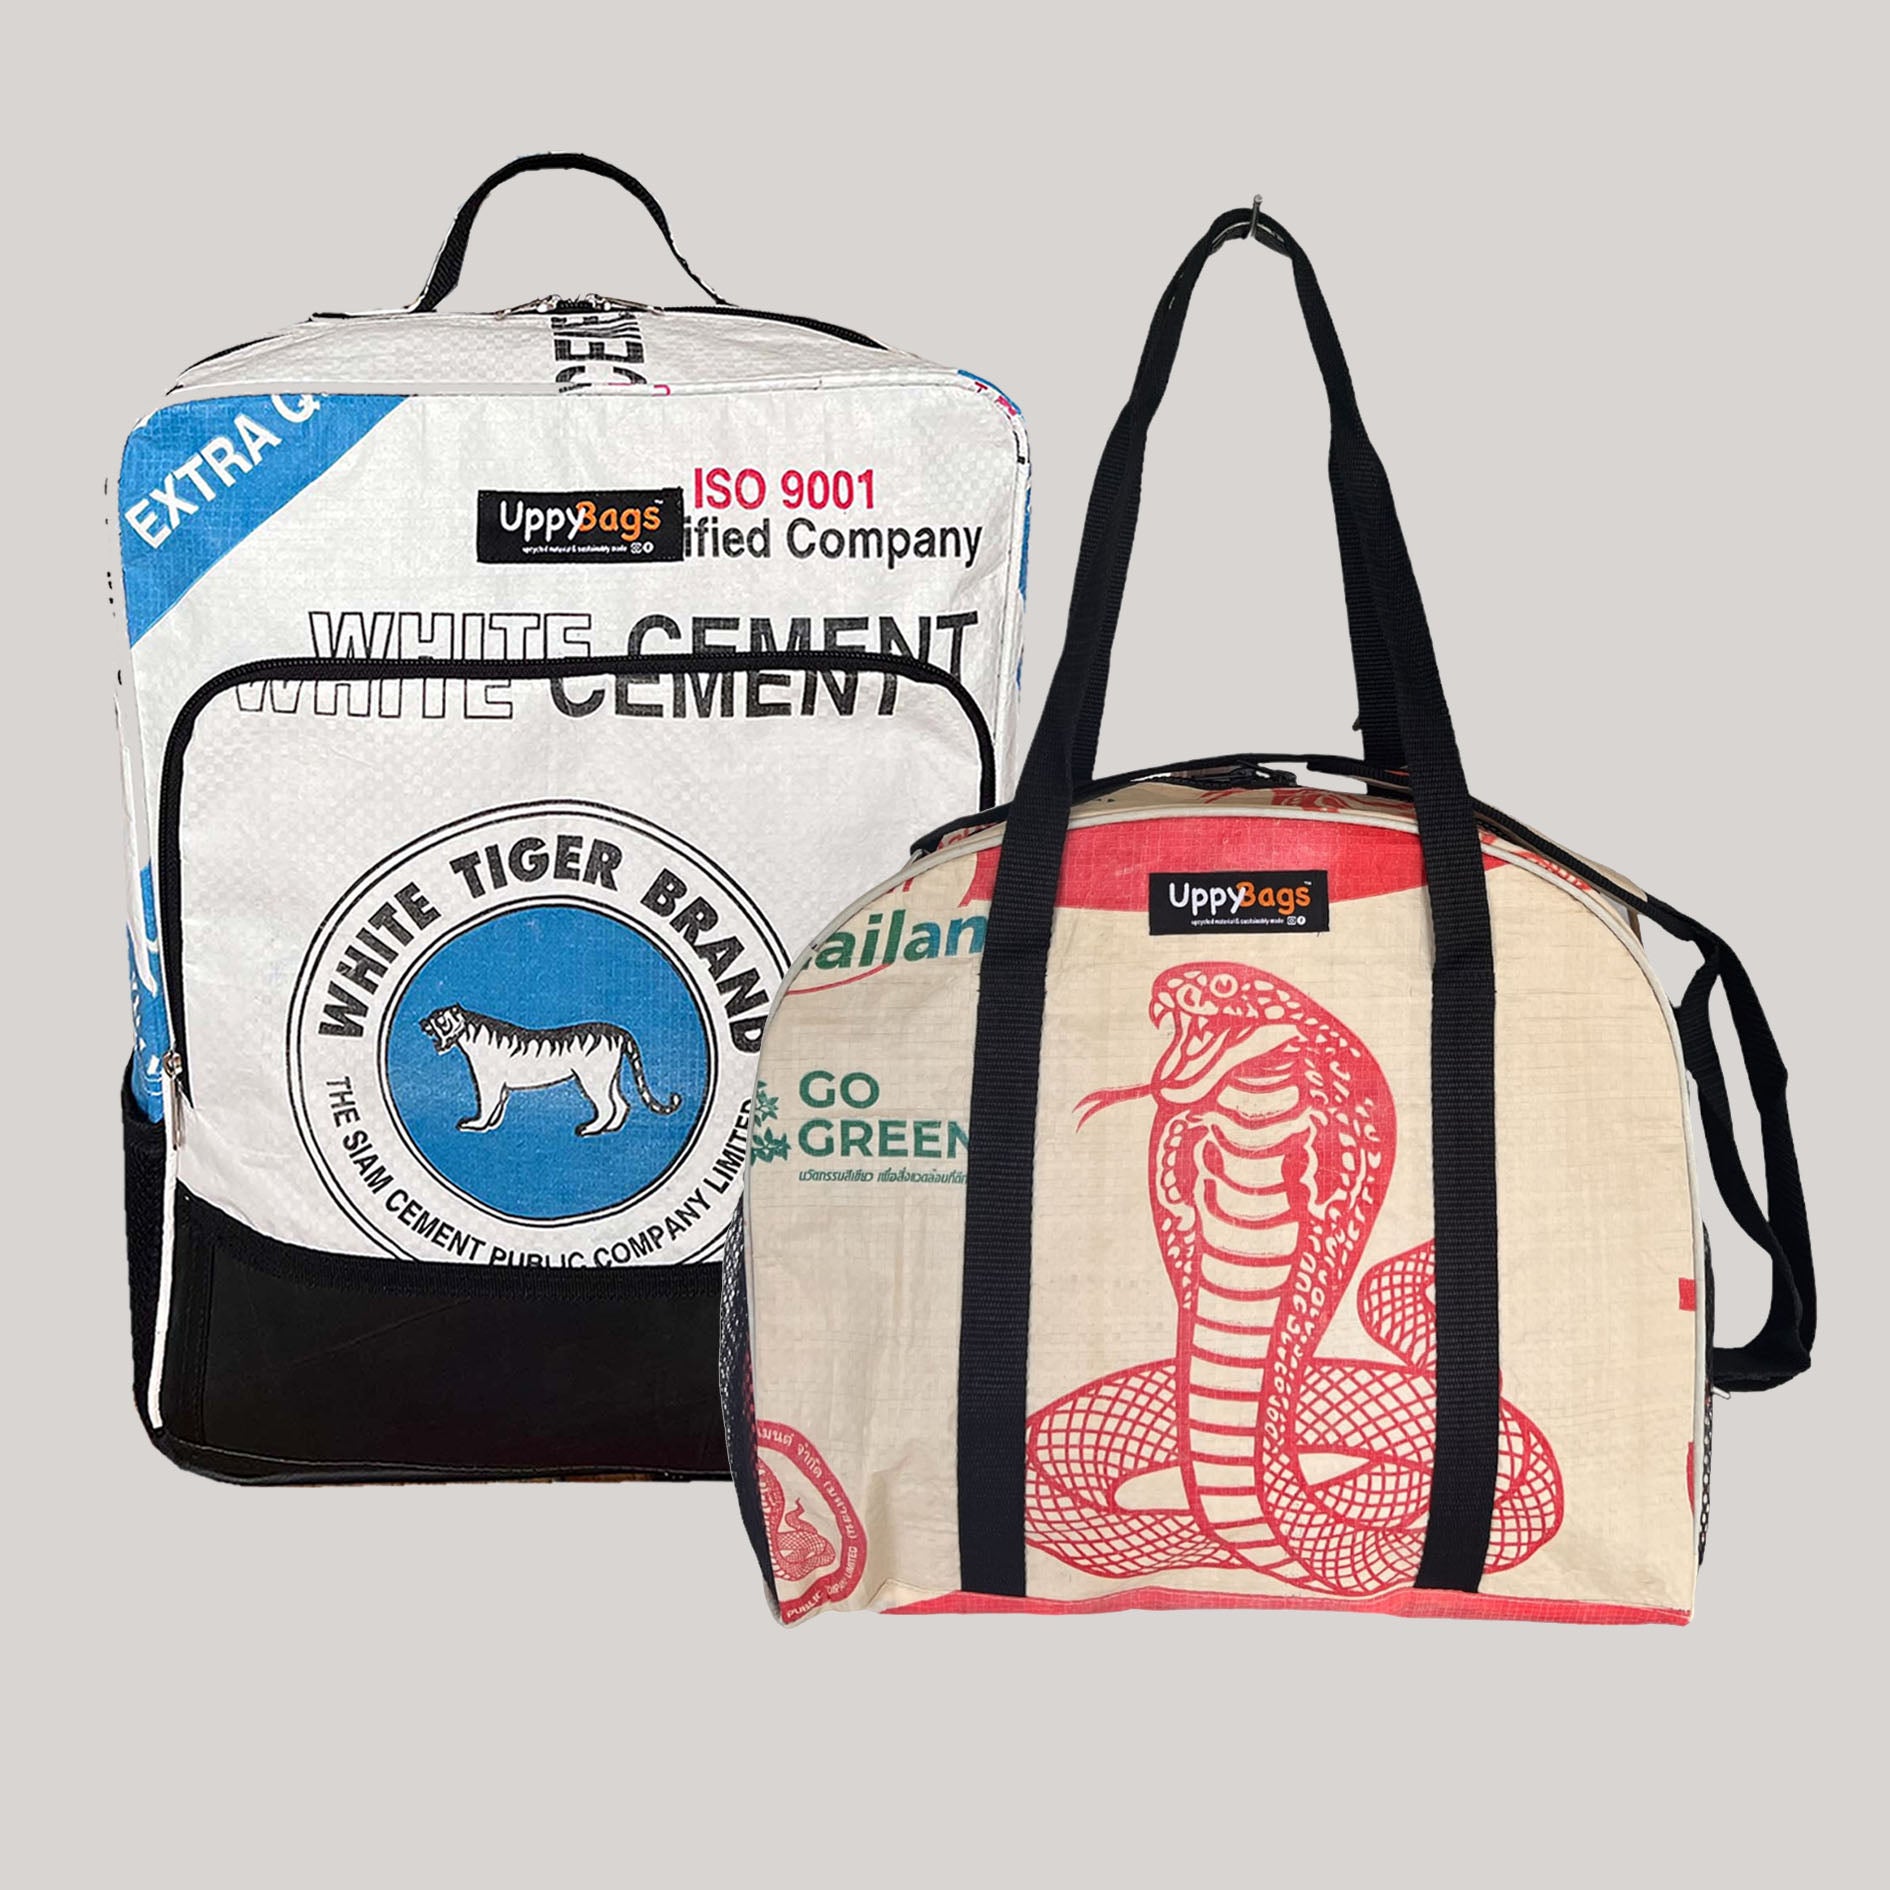 UPCYCLED MATERIAL BAGS MADE OF CEMENT BAGS UK